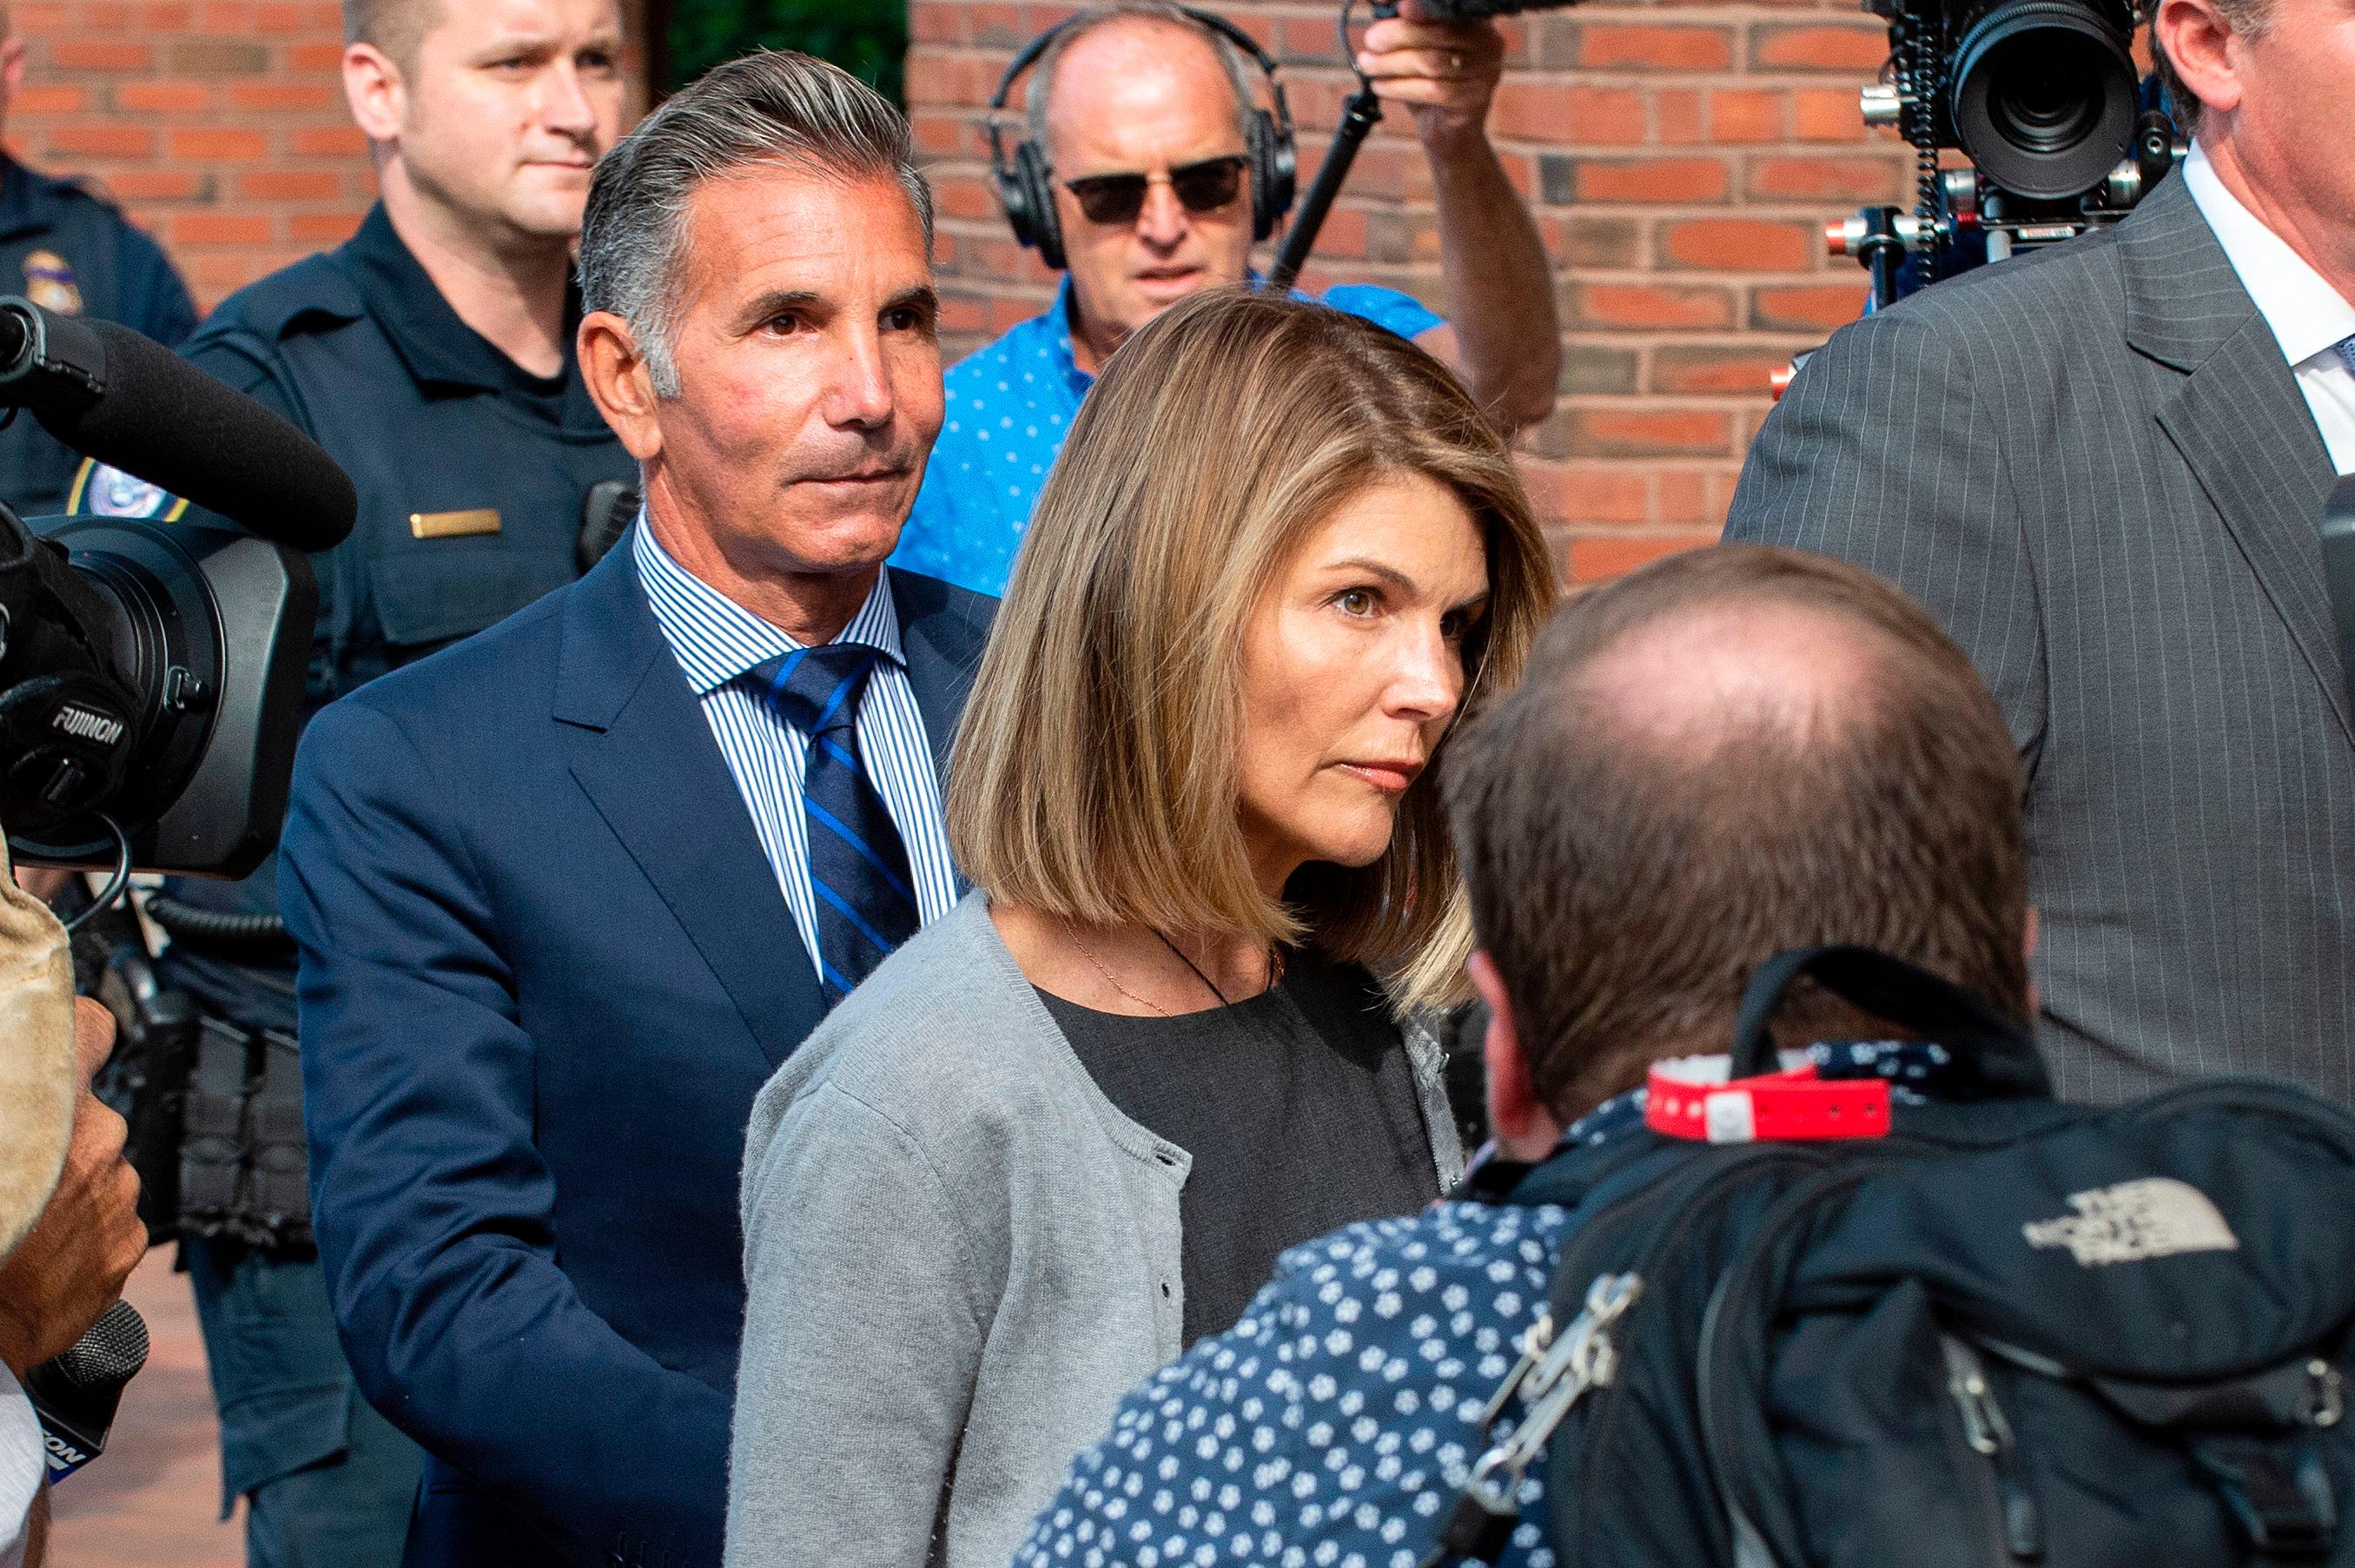 Lori Loughlin’s Husband Mossimo Giannulli’s Email Found Saying He Had To ‘Work The System’